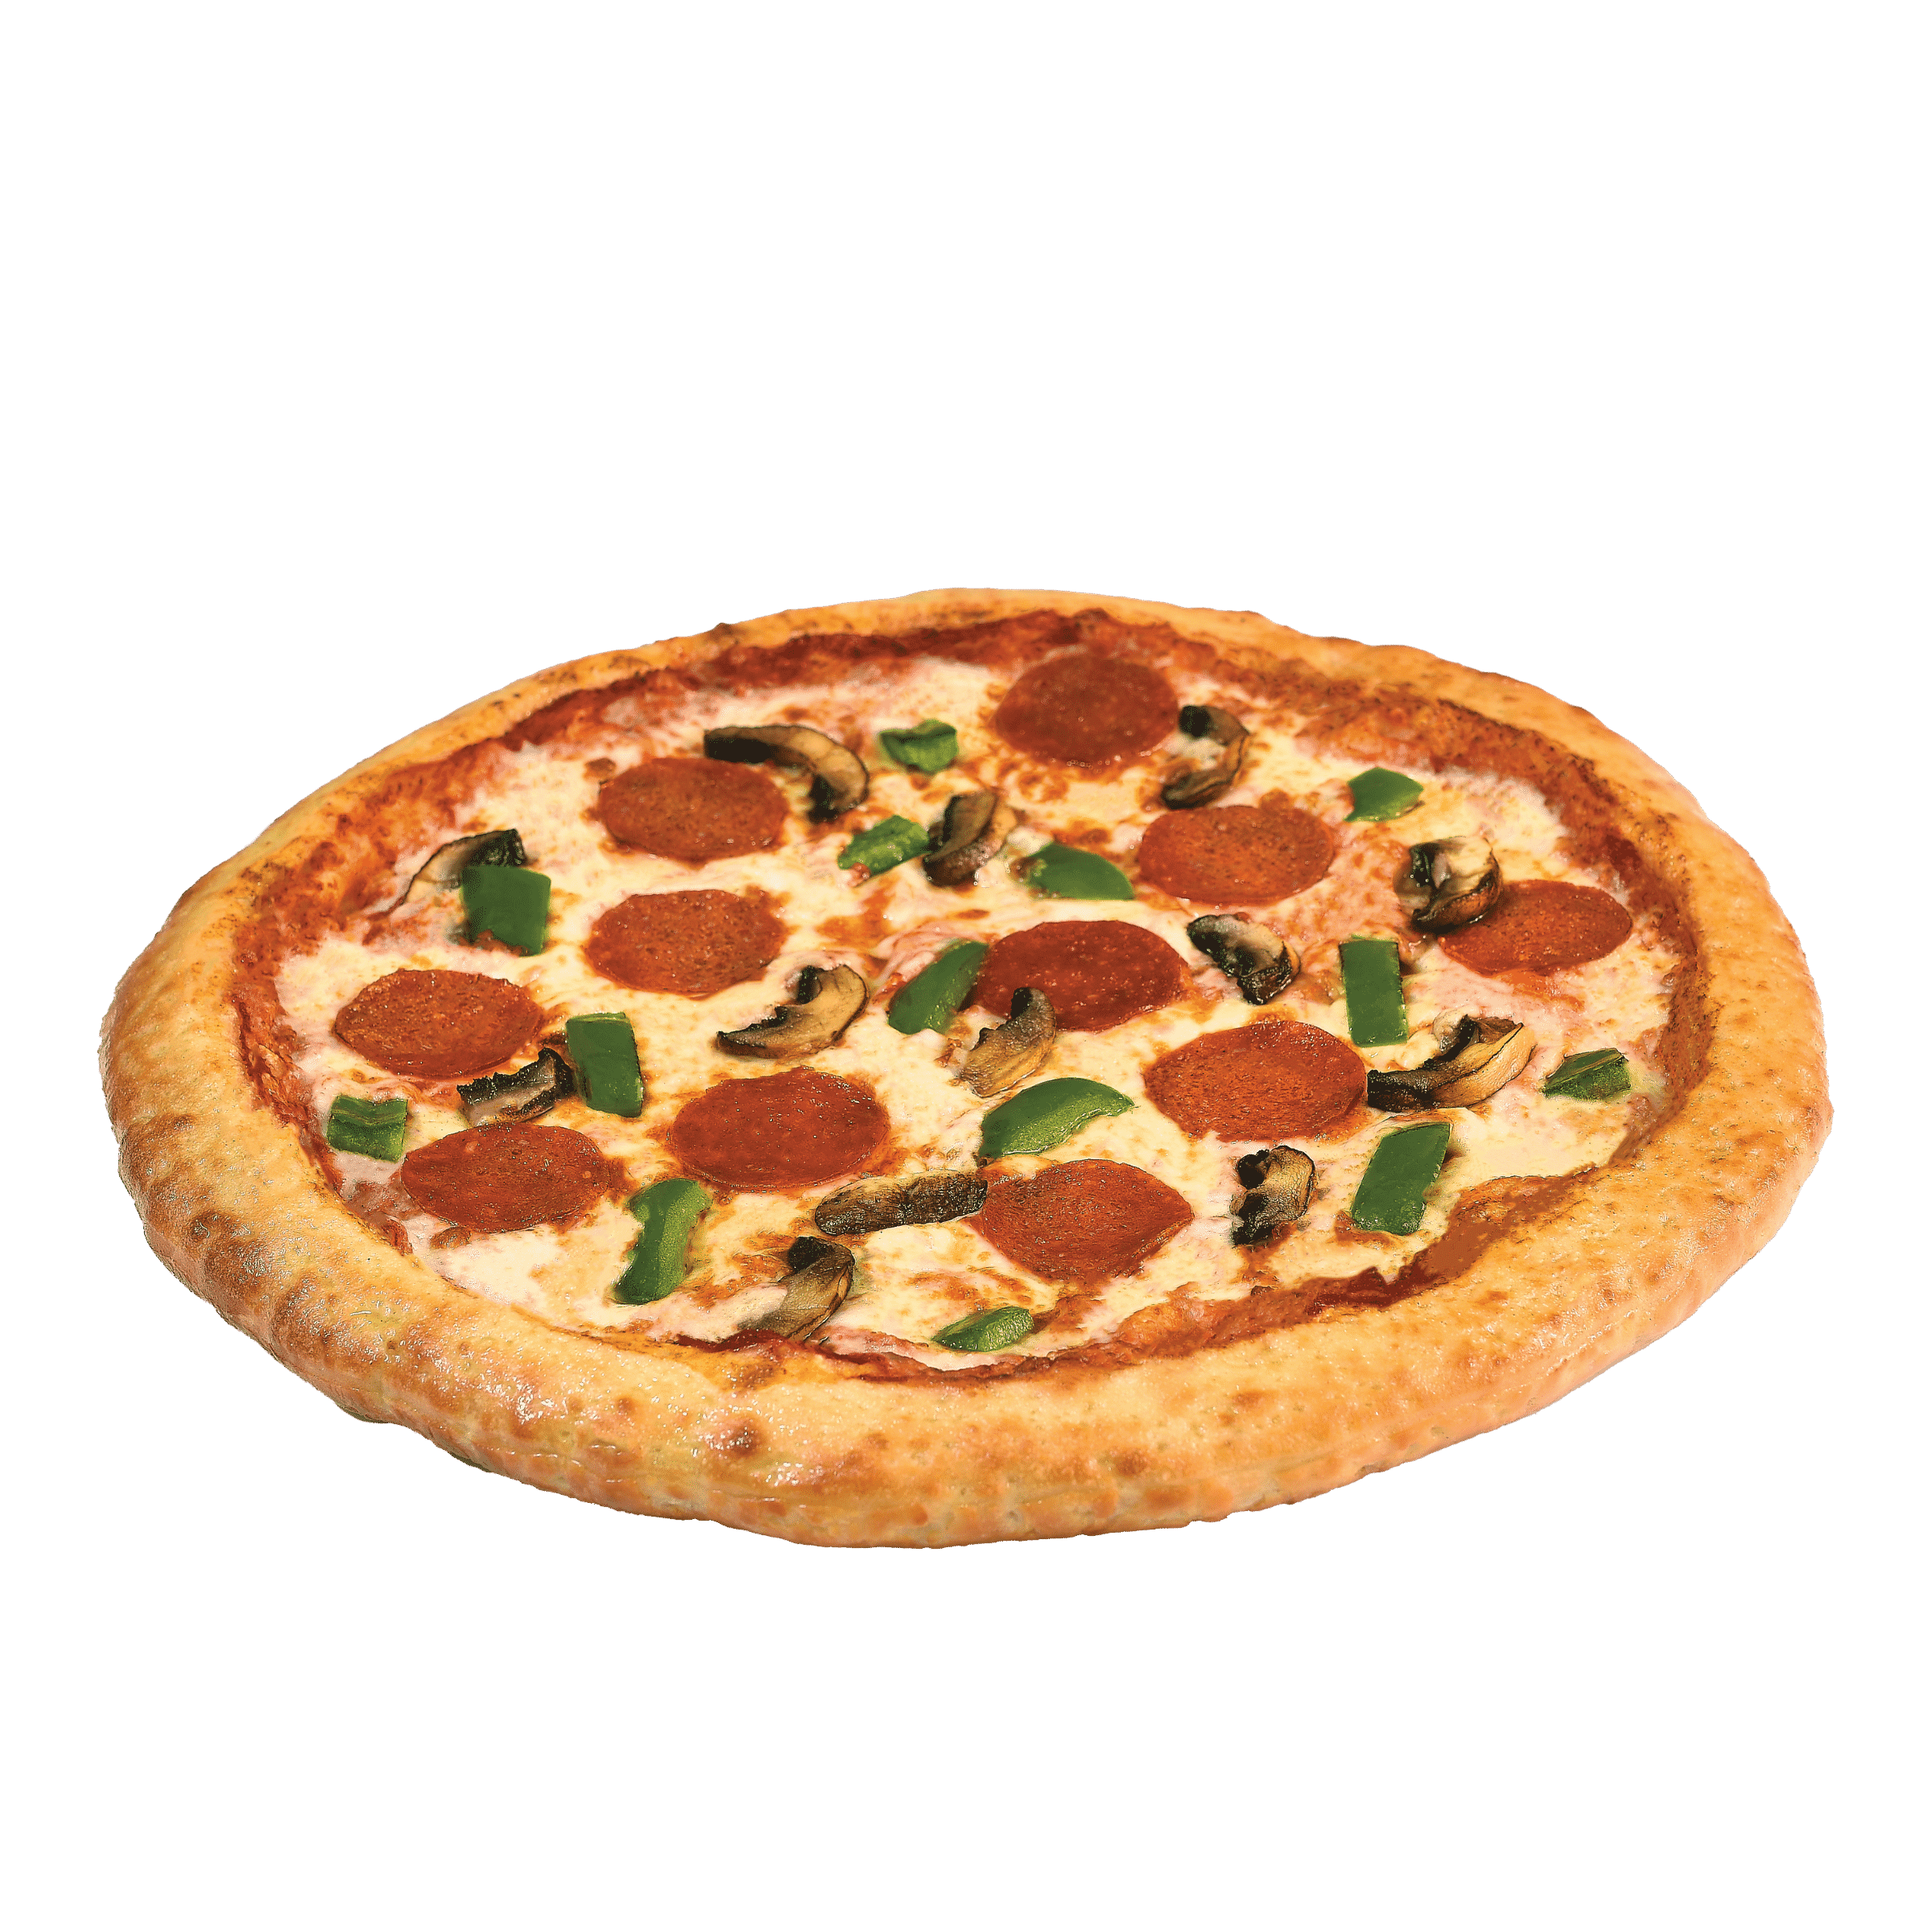 Special Offers Pizza Deals and Coupons, Order Pizza Online